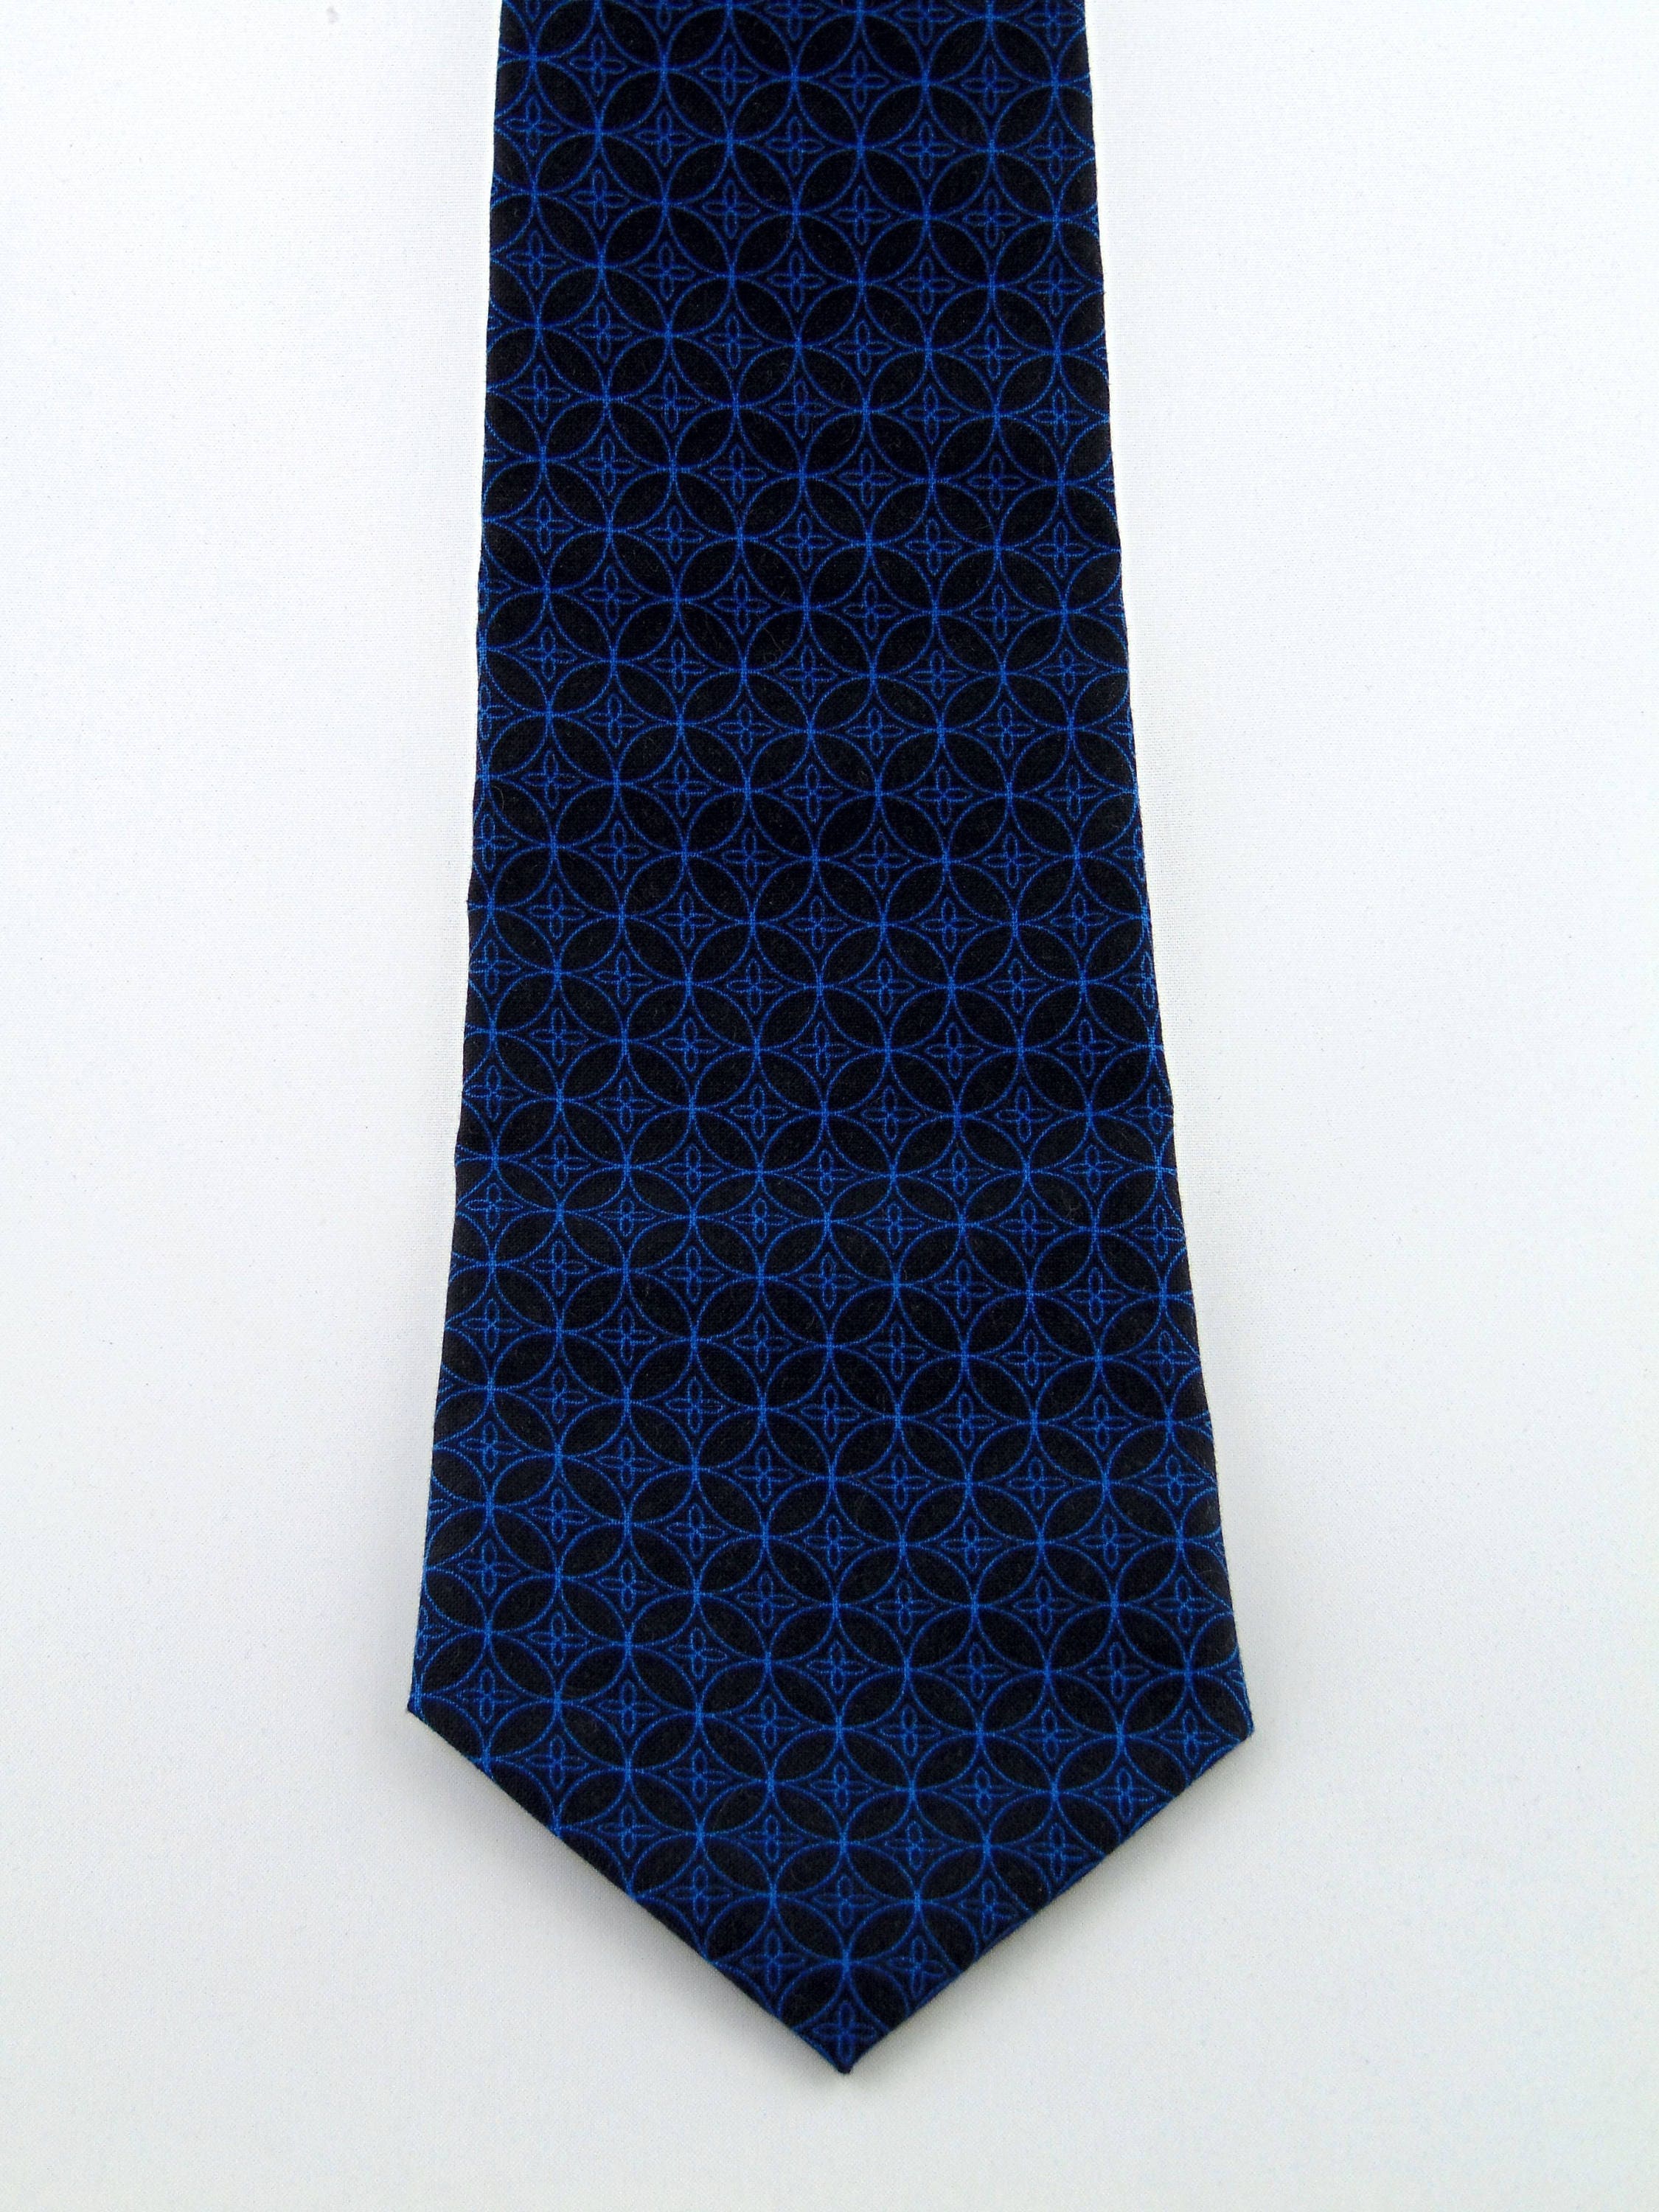 Blue Neck Tie – Mens Navy Necktie with Classic Pattern, Makes a Great ...